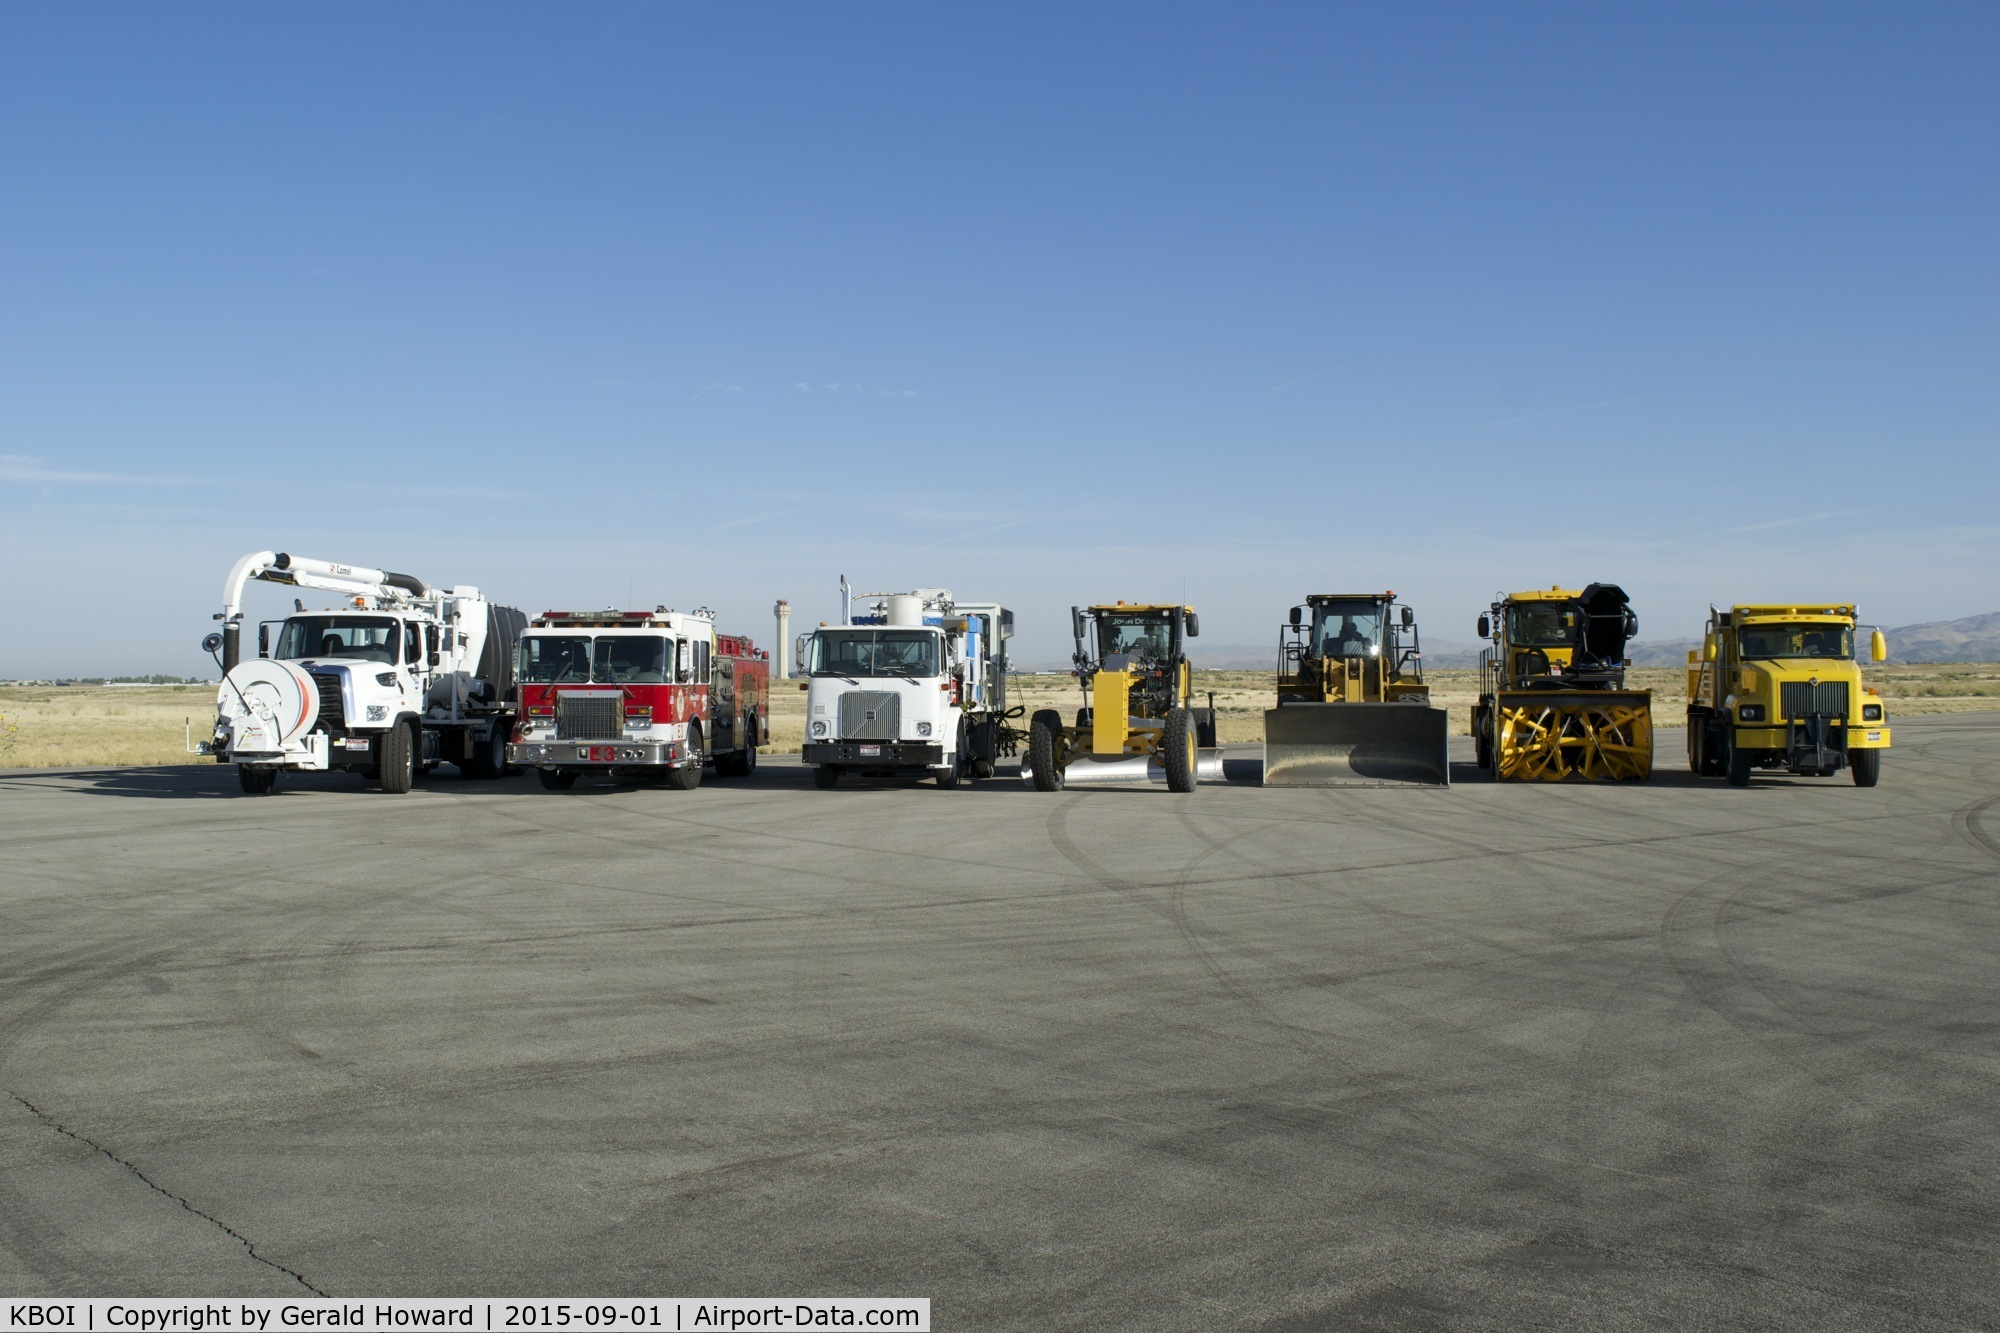 Boise Air Terminal/gowen Fld Airport (BOI) - Some of the vehicles used on the airport.